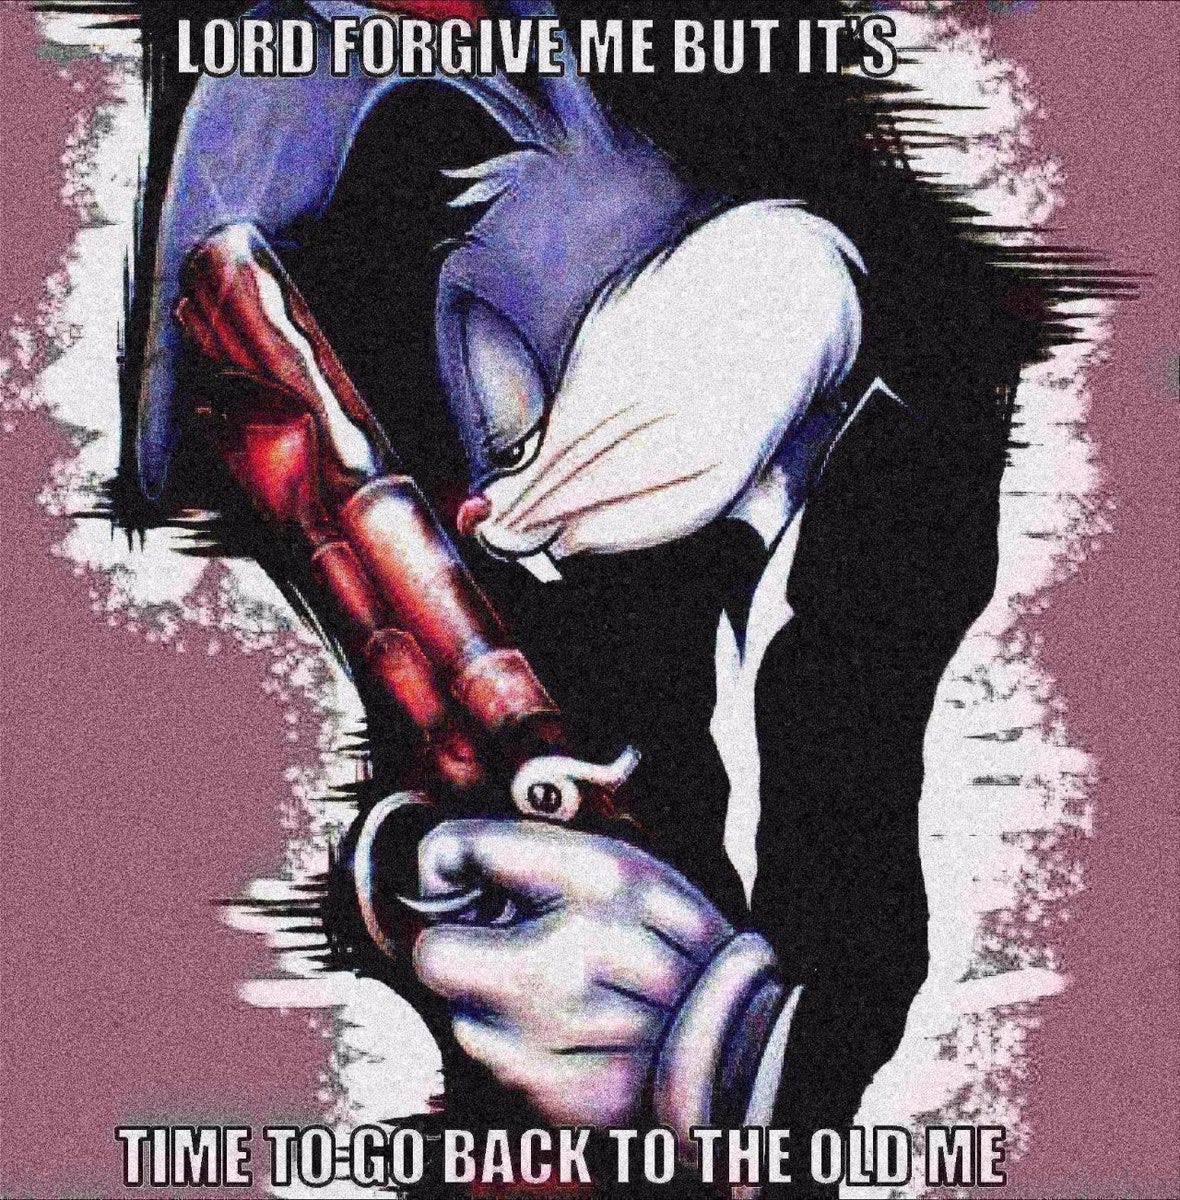 Silly Bugs Bunny "lord forgive me but it's time to go back to the old me" meme